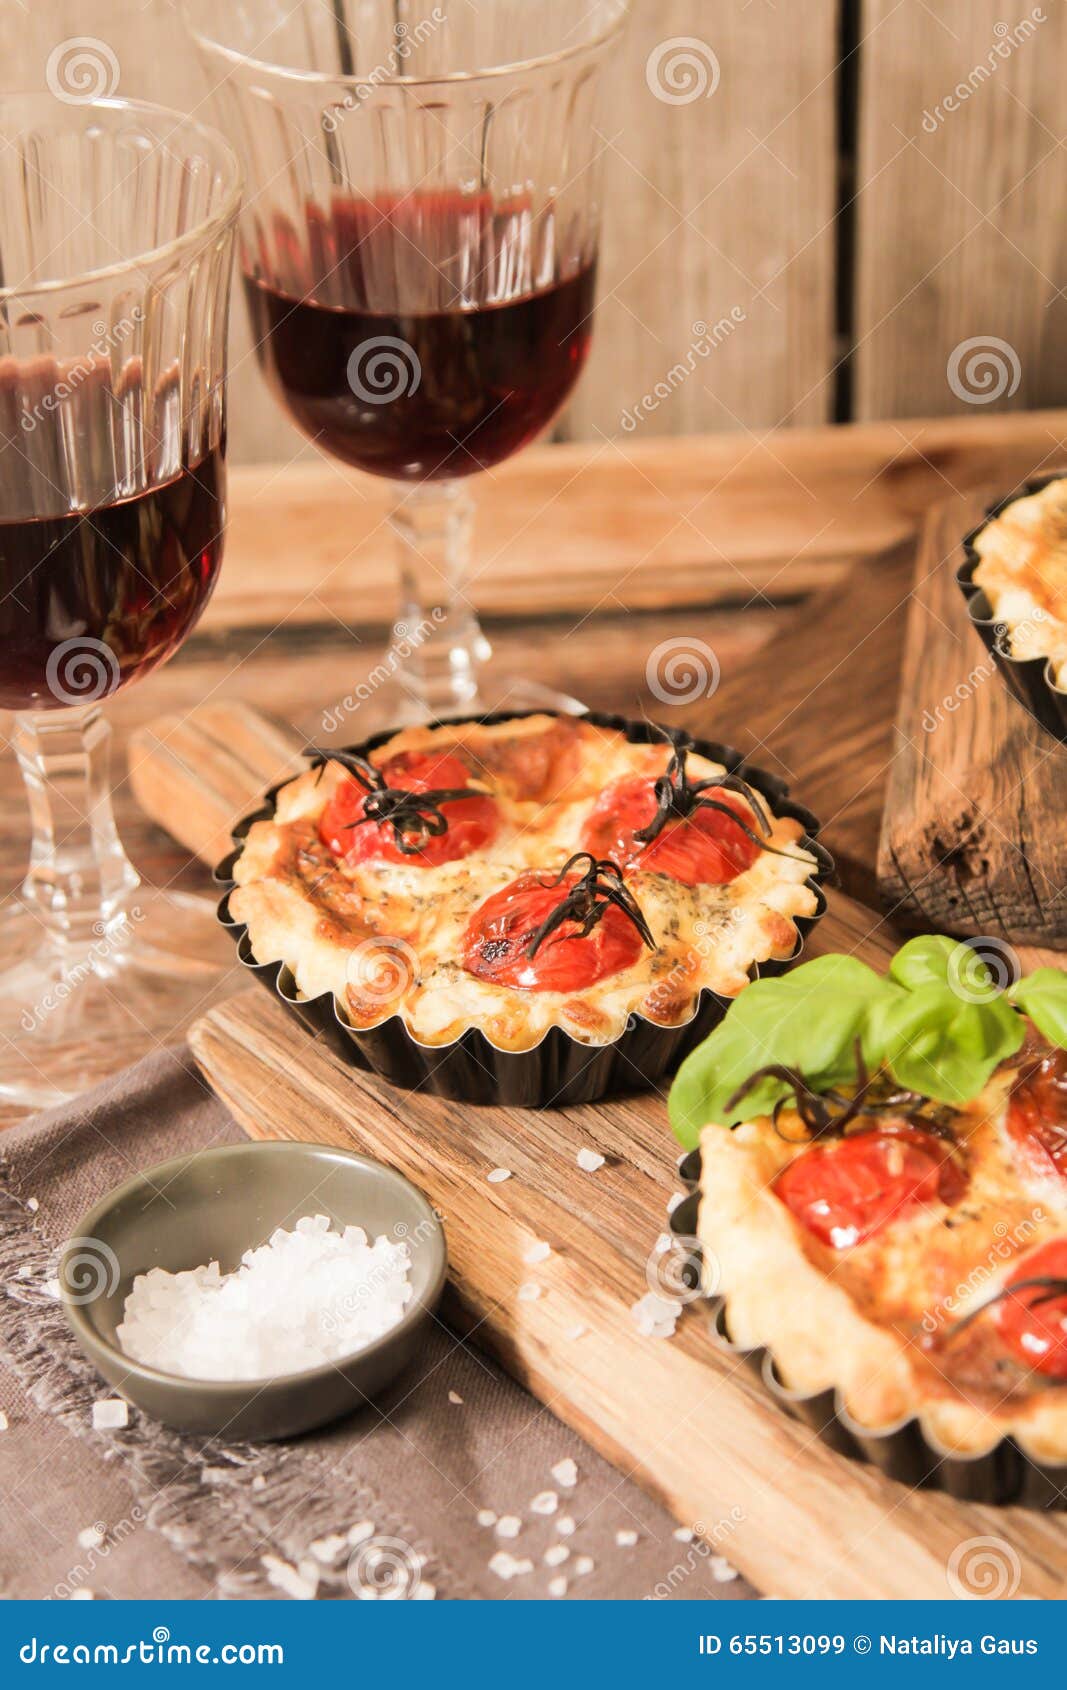 Omato Quiche with Wine the National France Stock Image - Image of ...